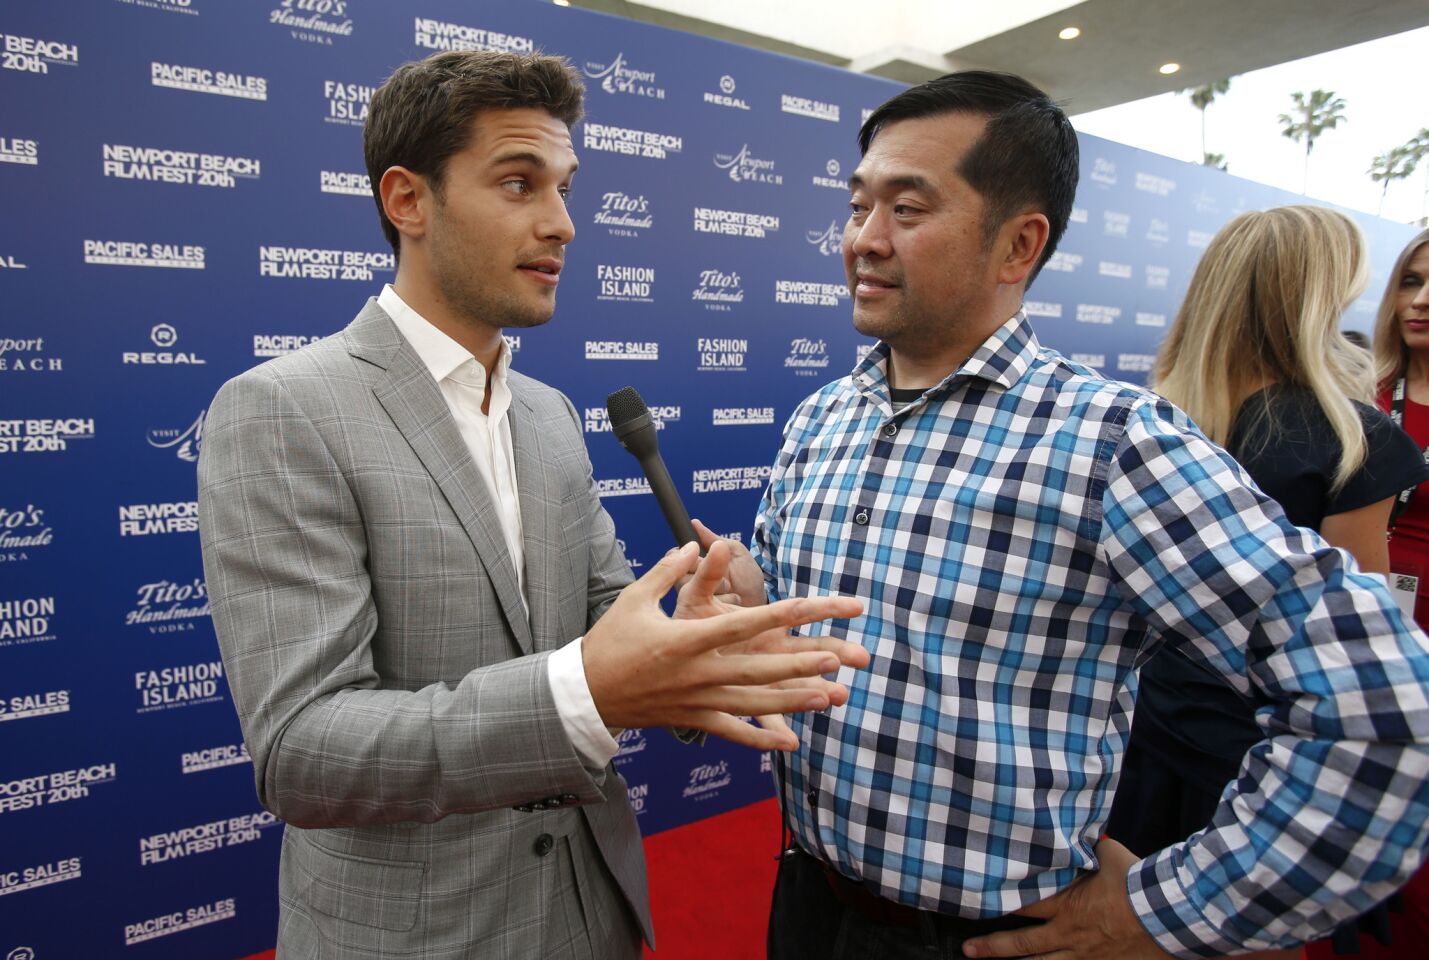 Actor Ronen Rubinstein, who's in the movie “Bushwhack Beats,” gives an interview on the red carpet at the opening night of the 2019 Newport Beach Film Festival on Thursday.